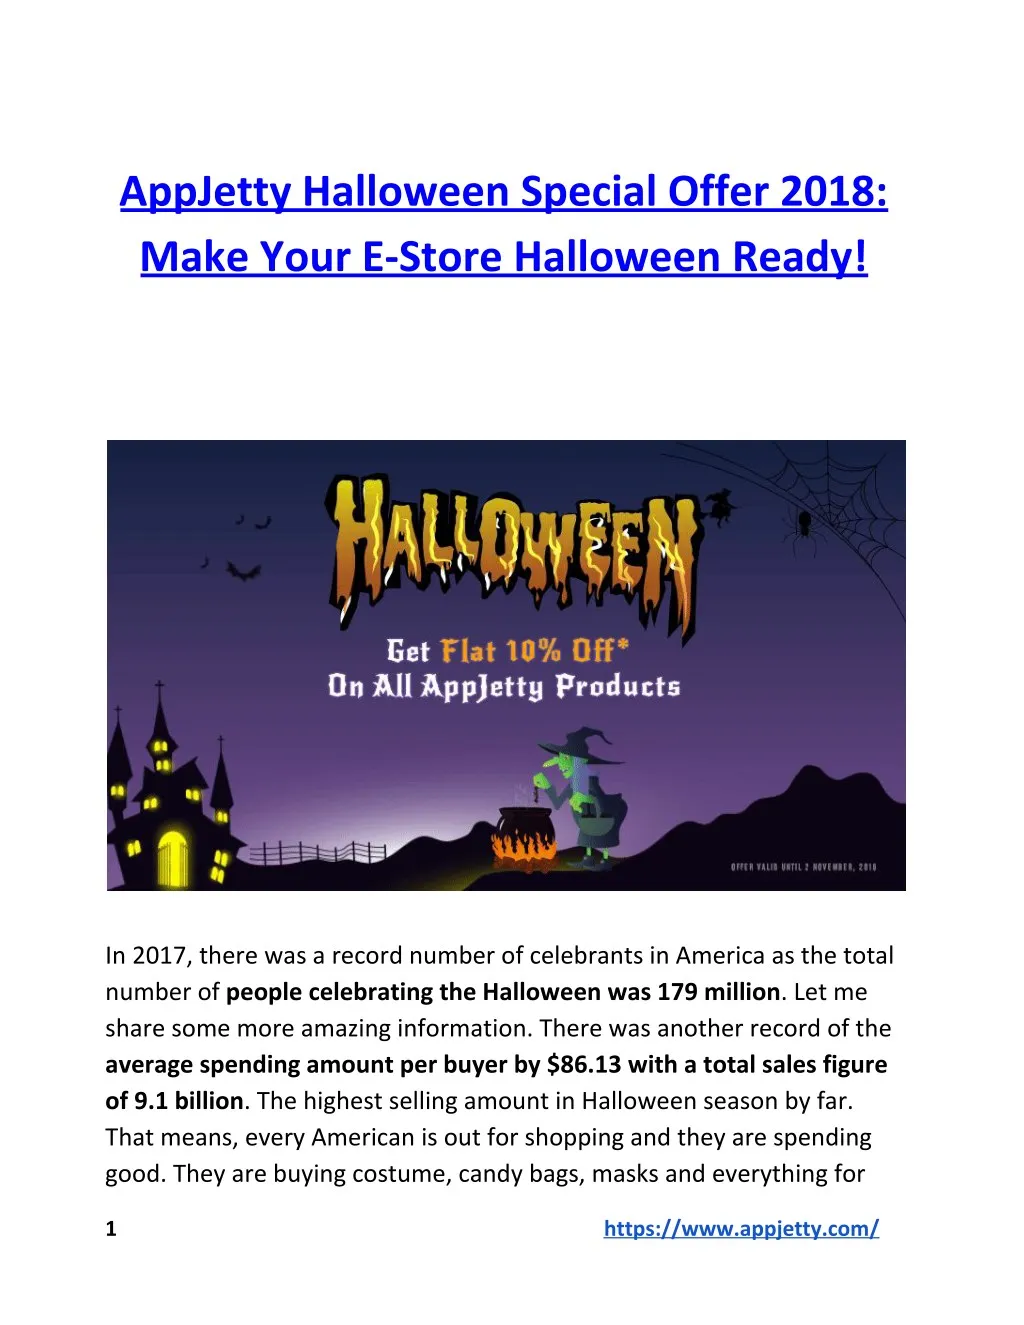 appjetty halloween special offer 2018 make your